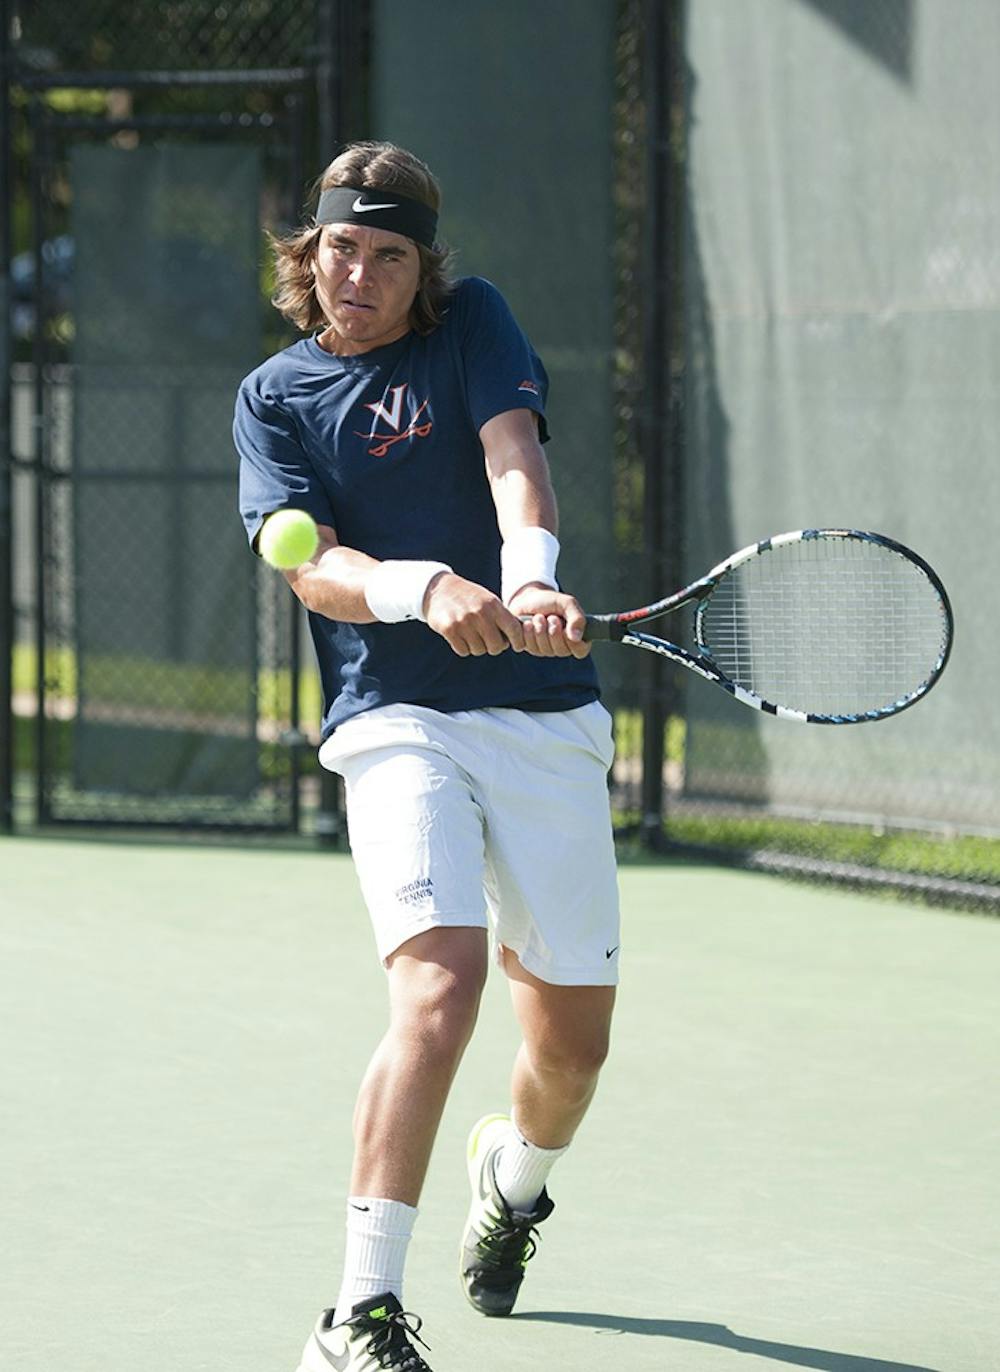 <p>Sophomore<strong>&nbsp;</strong>Collin Altamirano won a decisive match against NC State, allowing Virginia to advance to the&nbsp;ACC Tournament semifinals.</p>